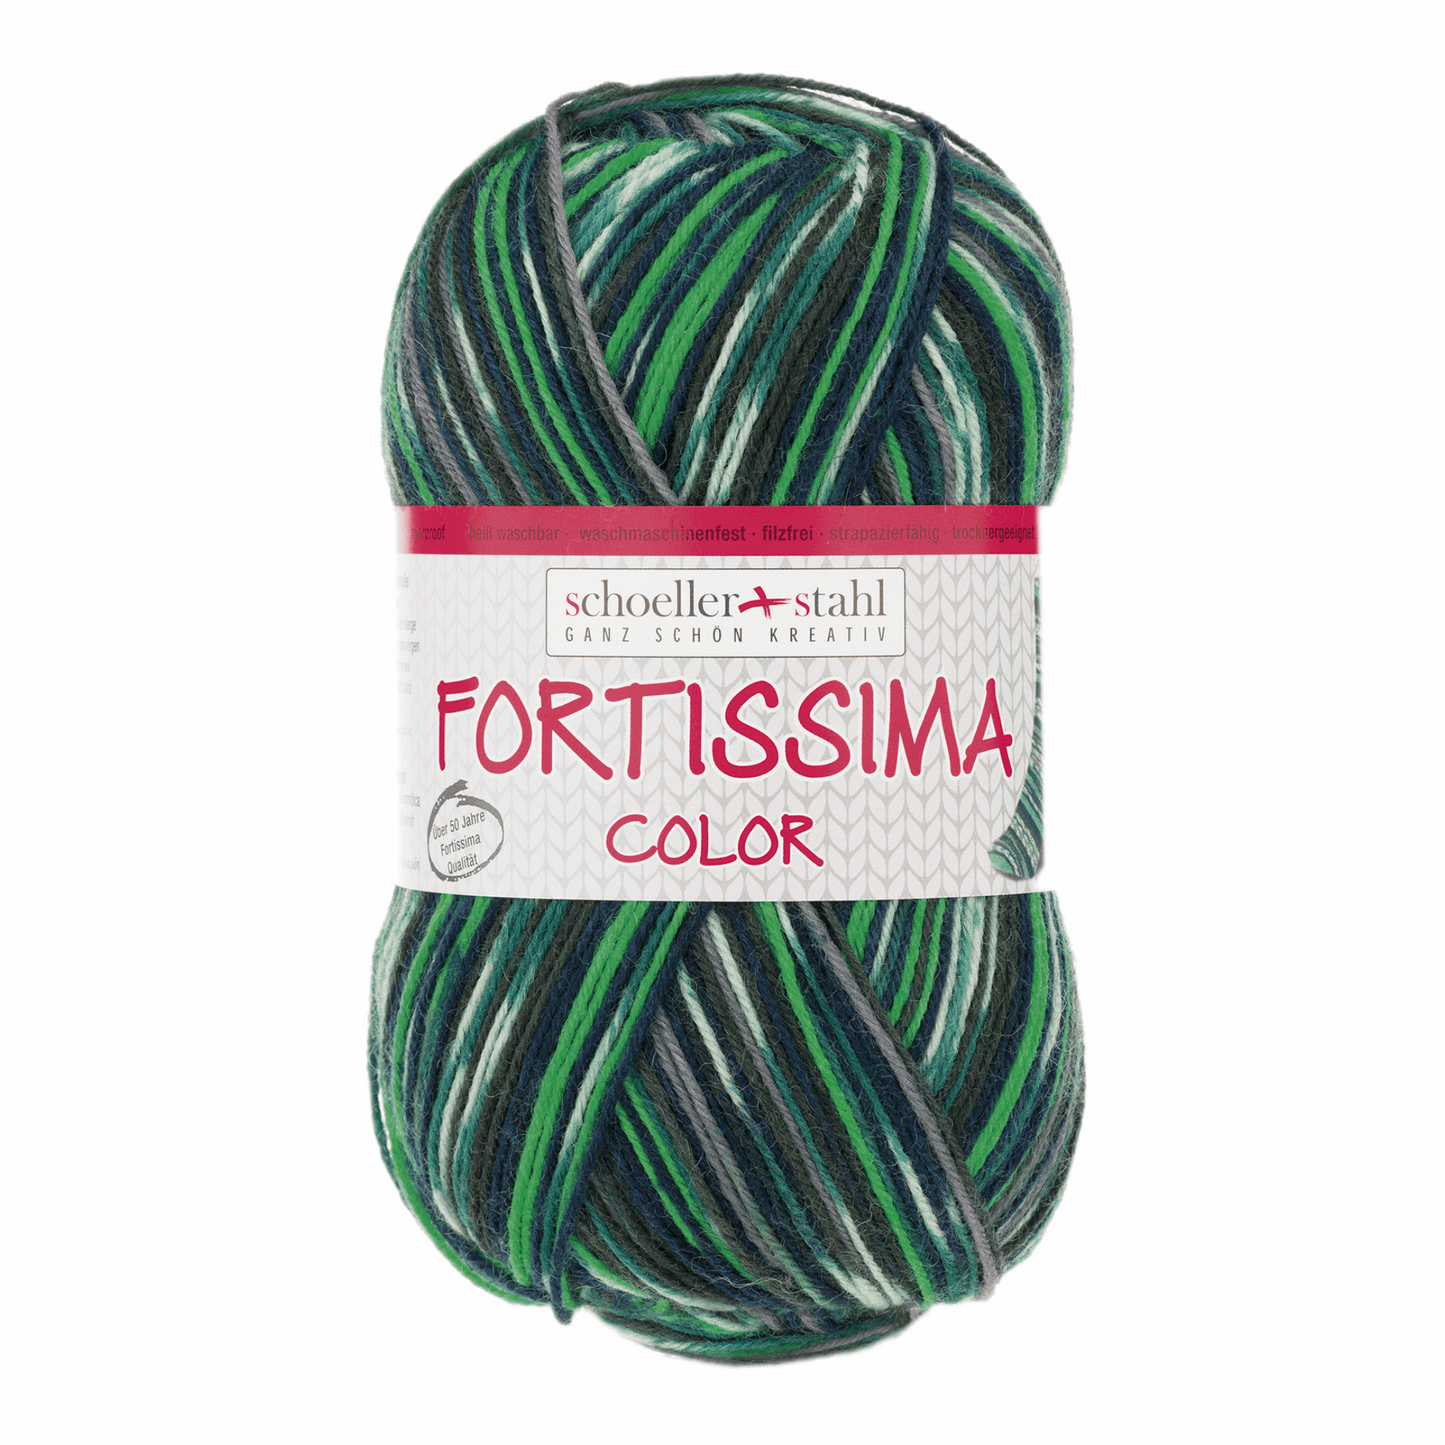 Fortissima socka 4-ply, 90028, color 2495, grass